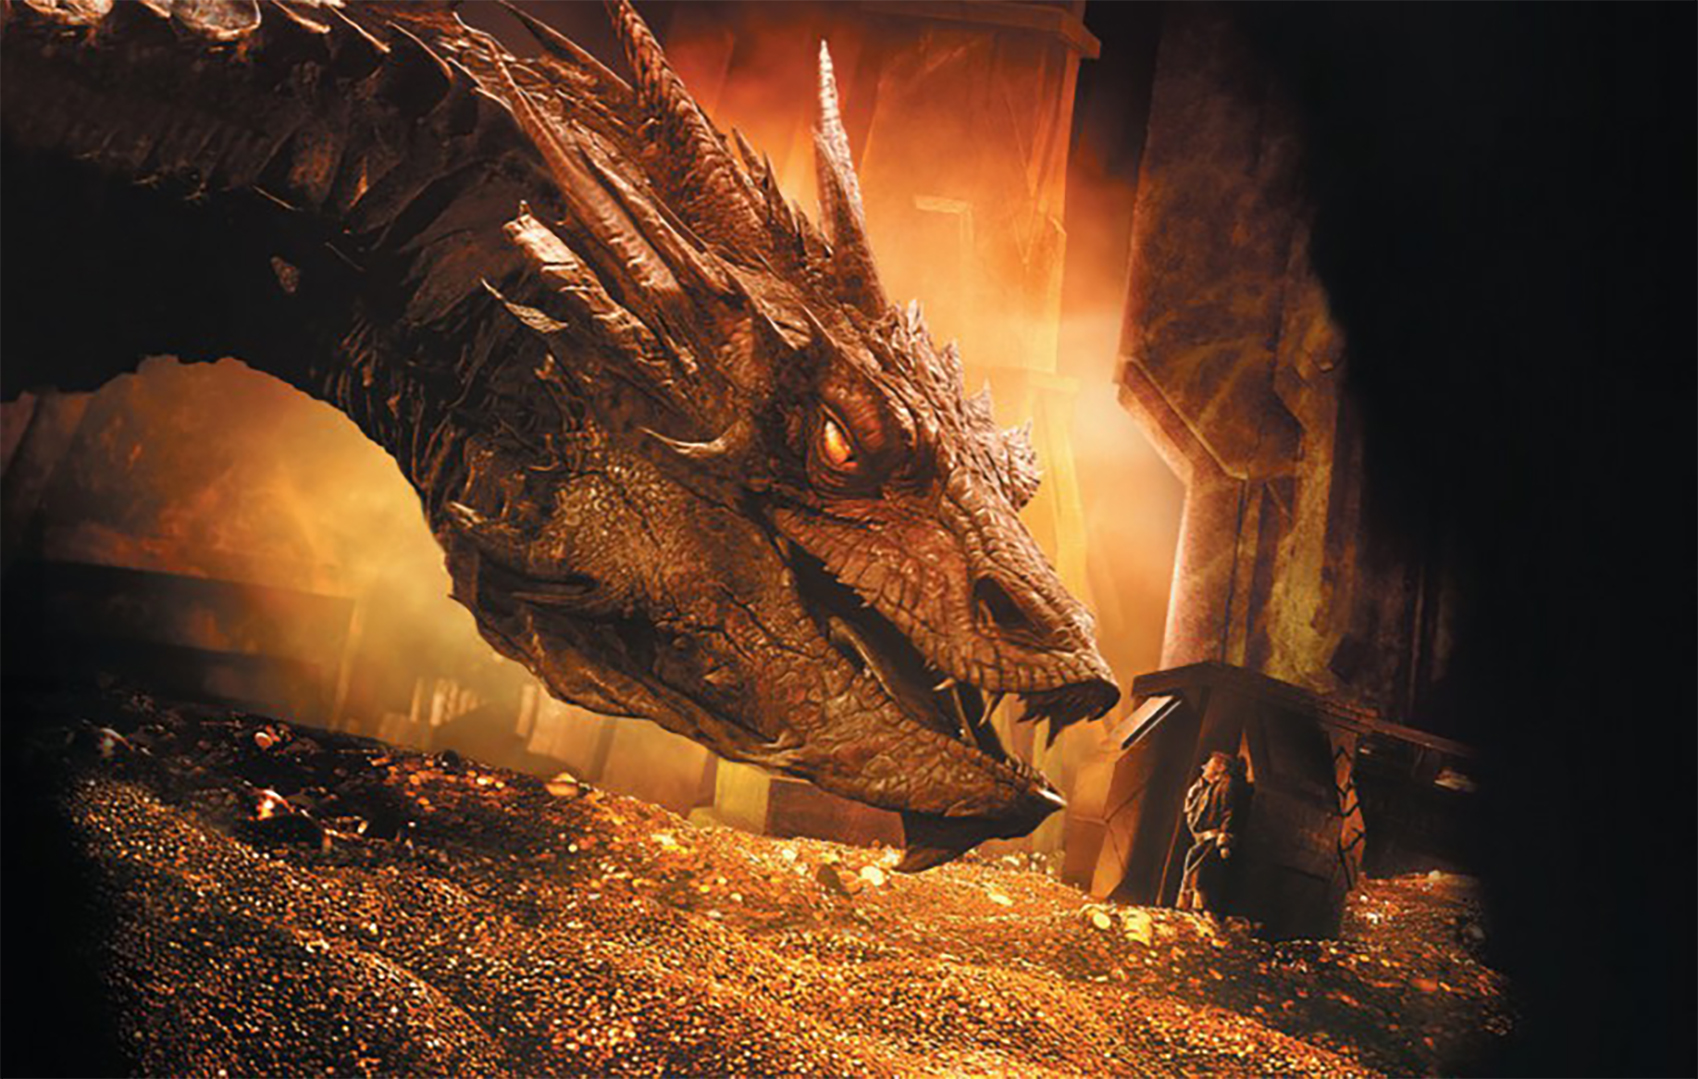 download the new version for ios The Hobbit: The Desolation of Smaug